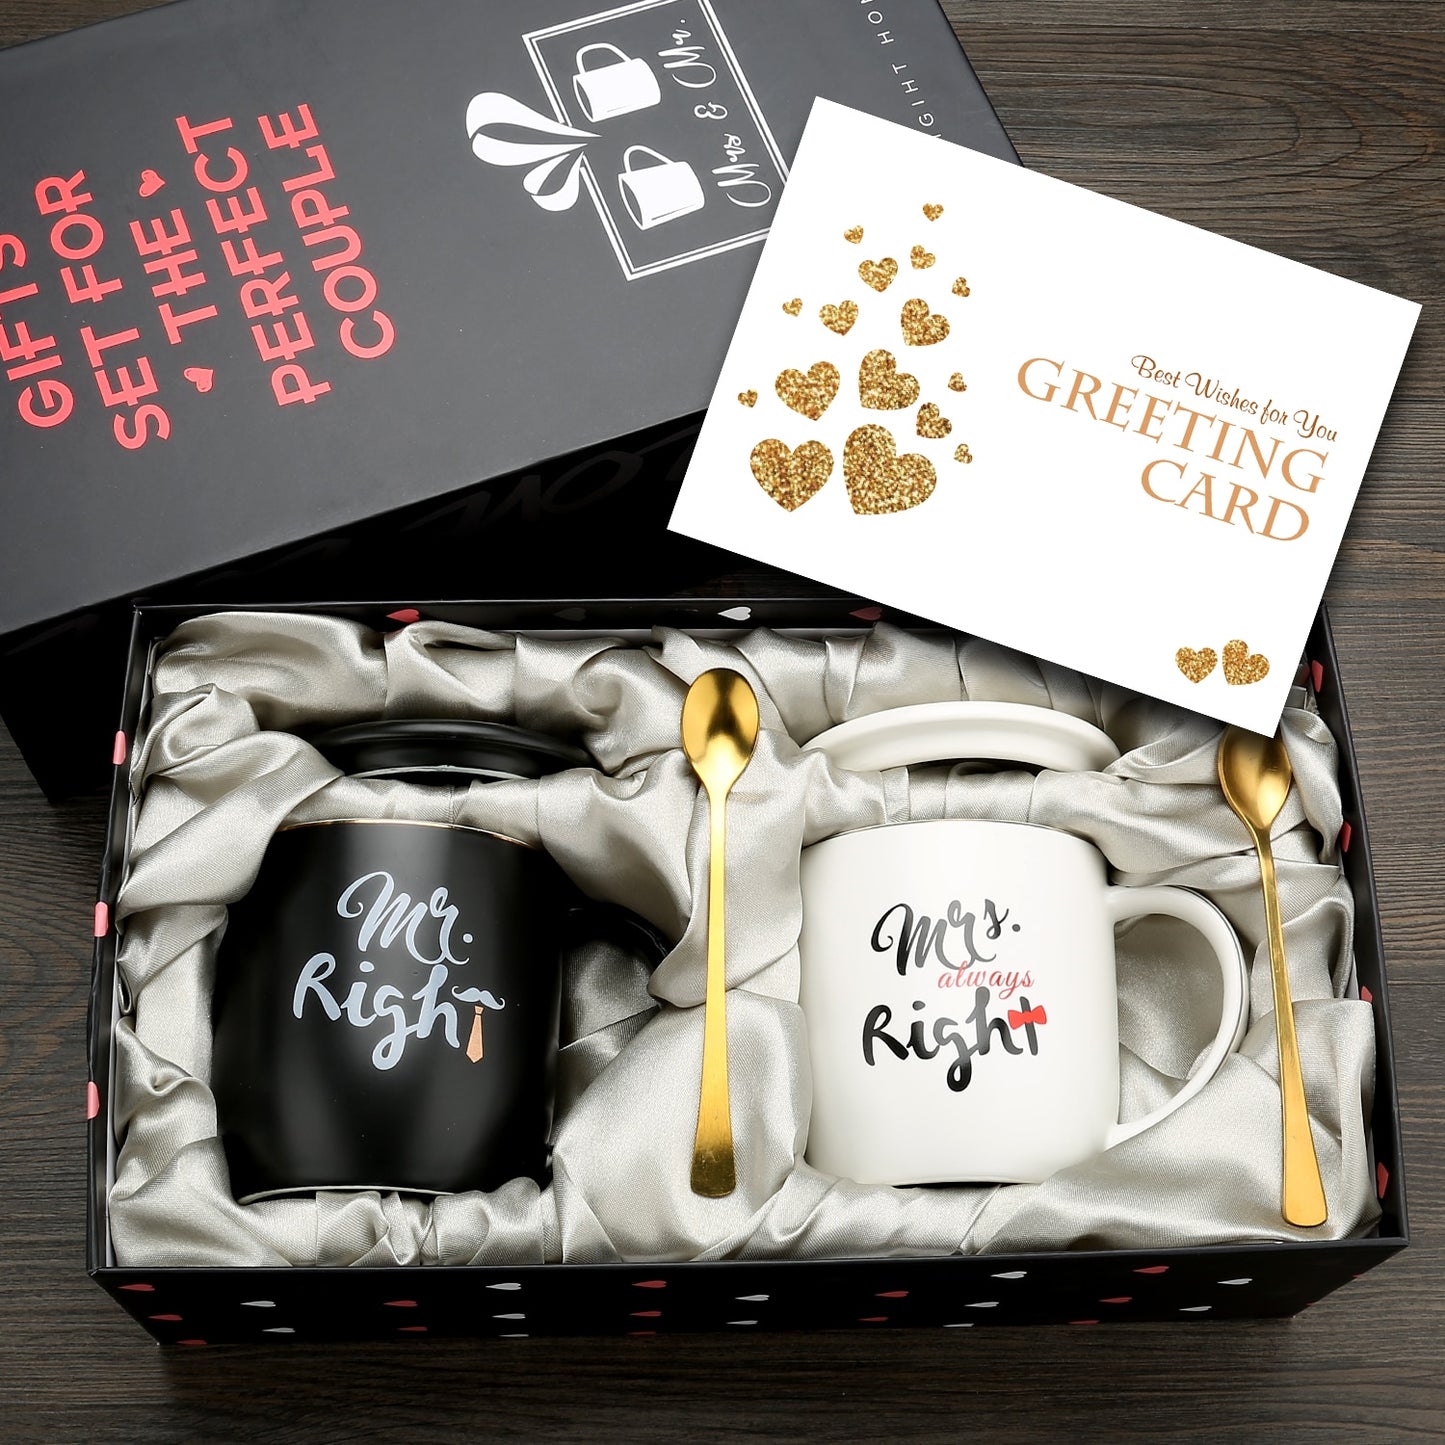 Mr and Mrs Coffee Mugs Creative Couples Black Ceramic Cups Wedding Gifts for Newlyweds Cup Set Perfect Gift-Set for Engagement - kmtell.com